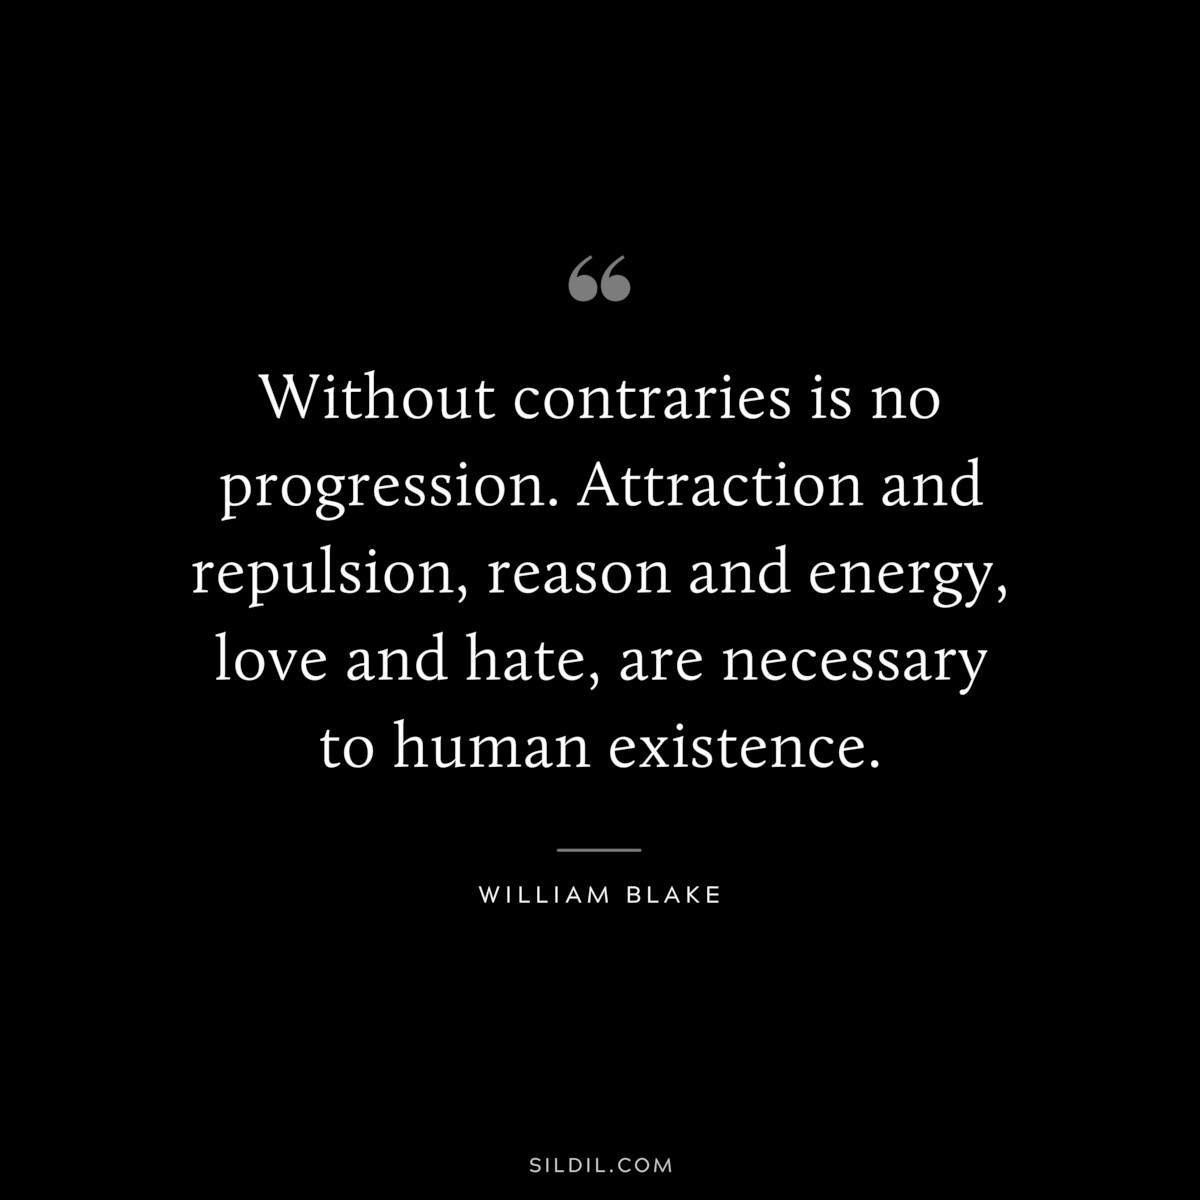 Without contraries is no progression. Attraction and repulsion, reason and energy, love and hate, are necessary to human existence. ― William Blake